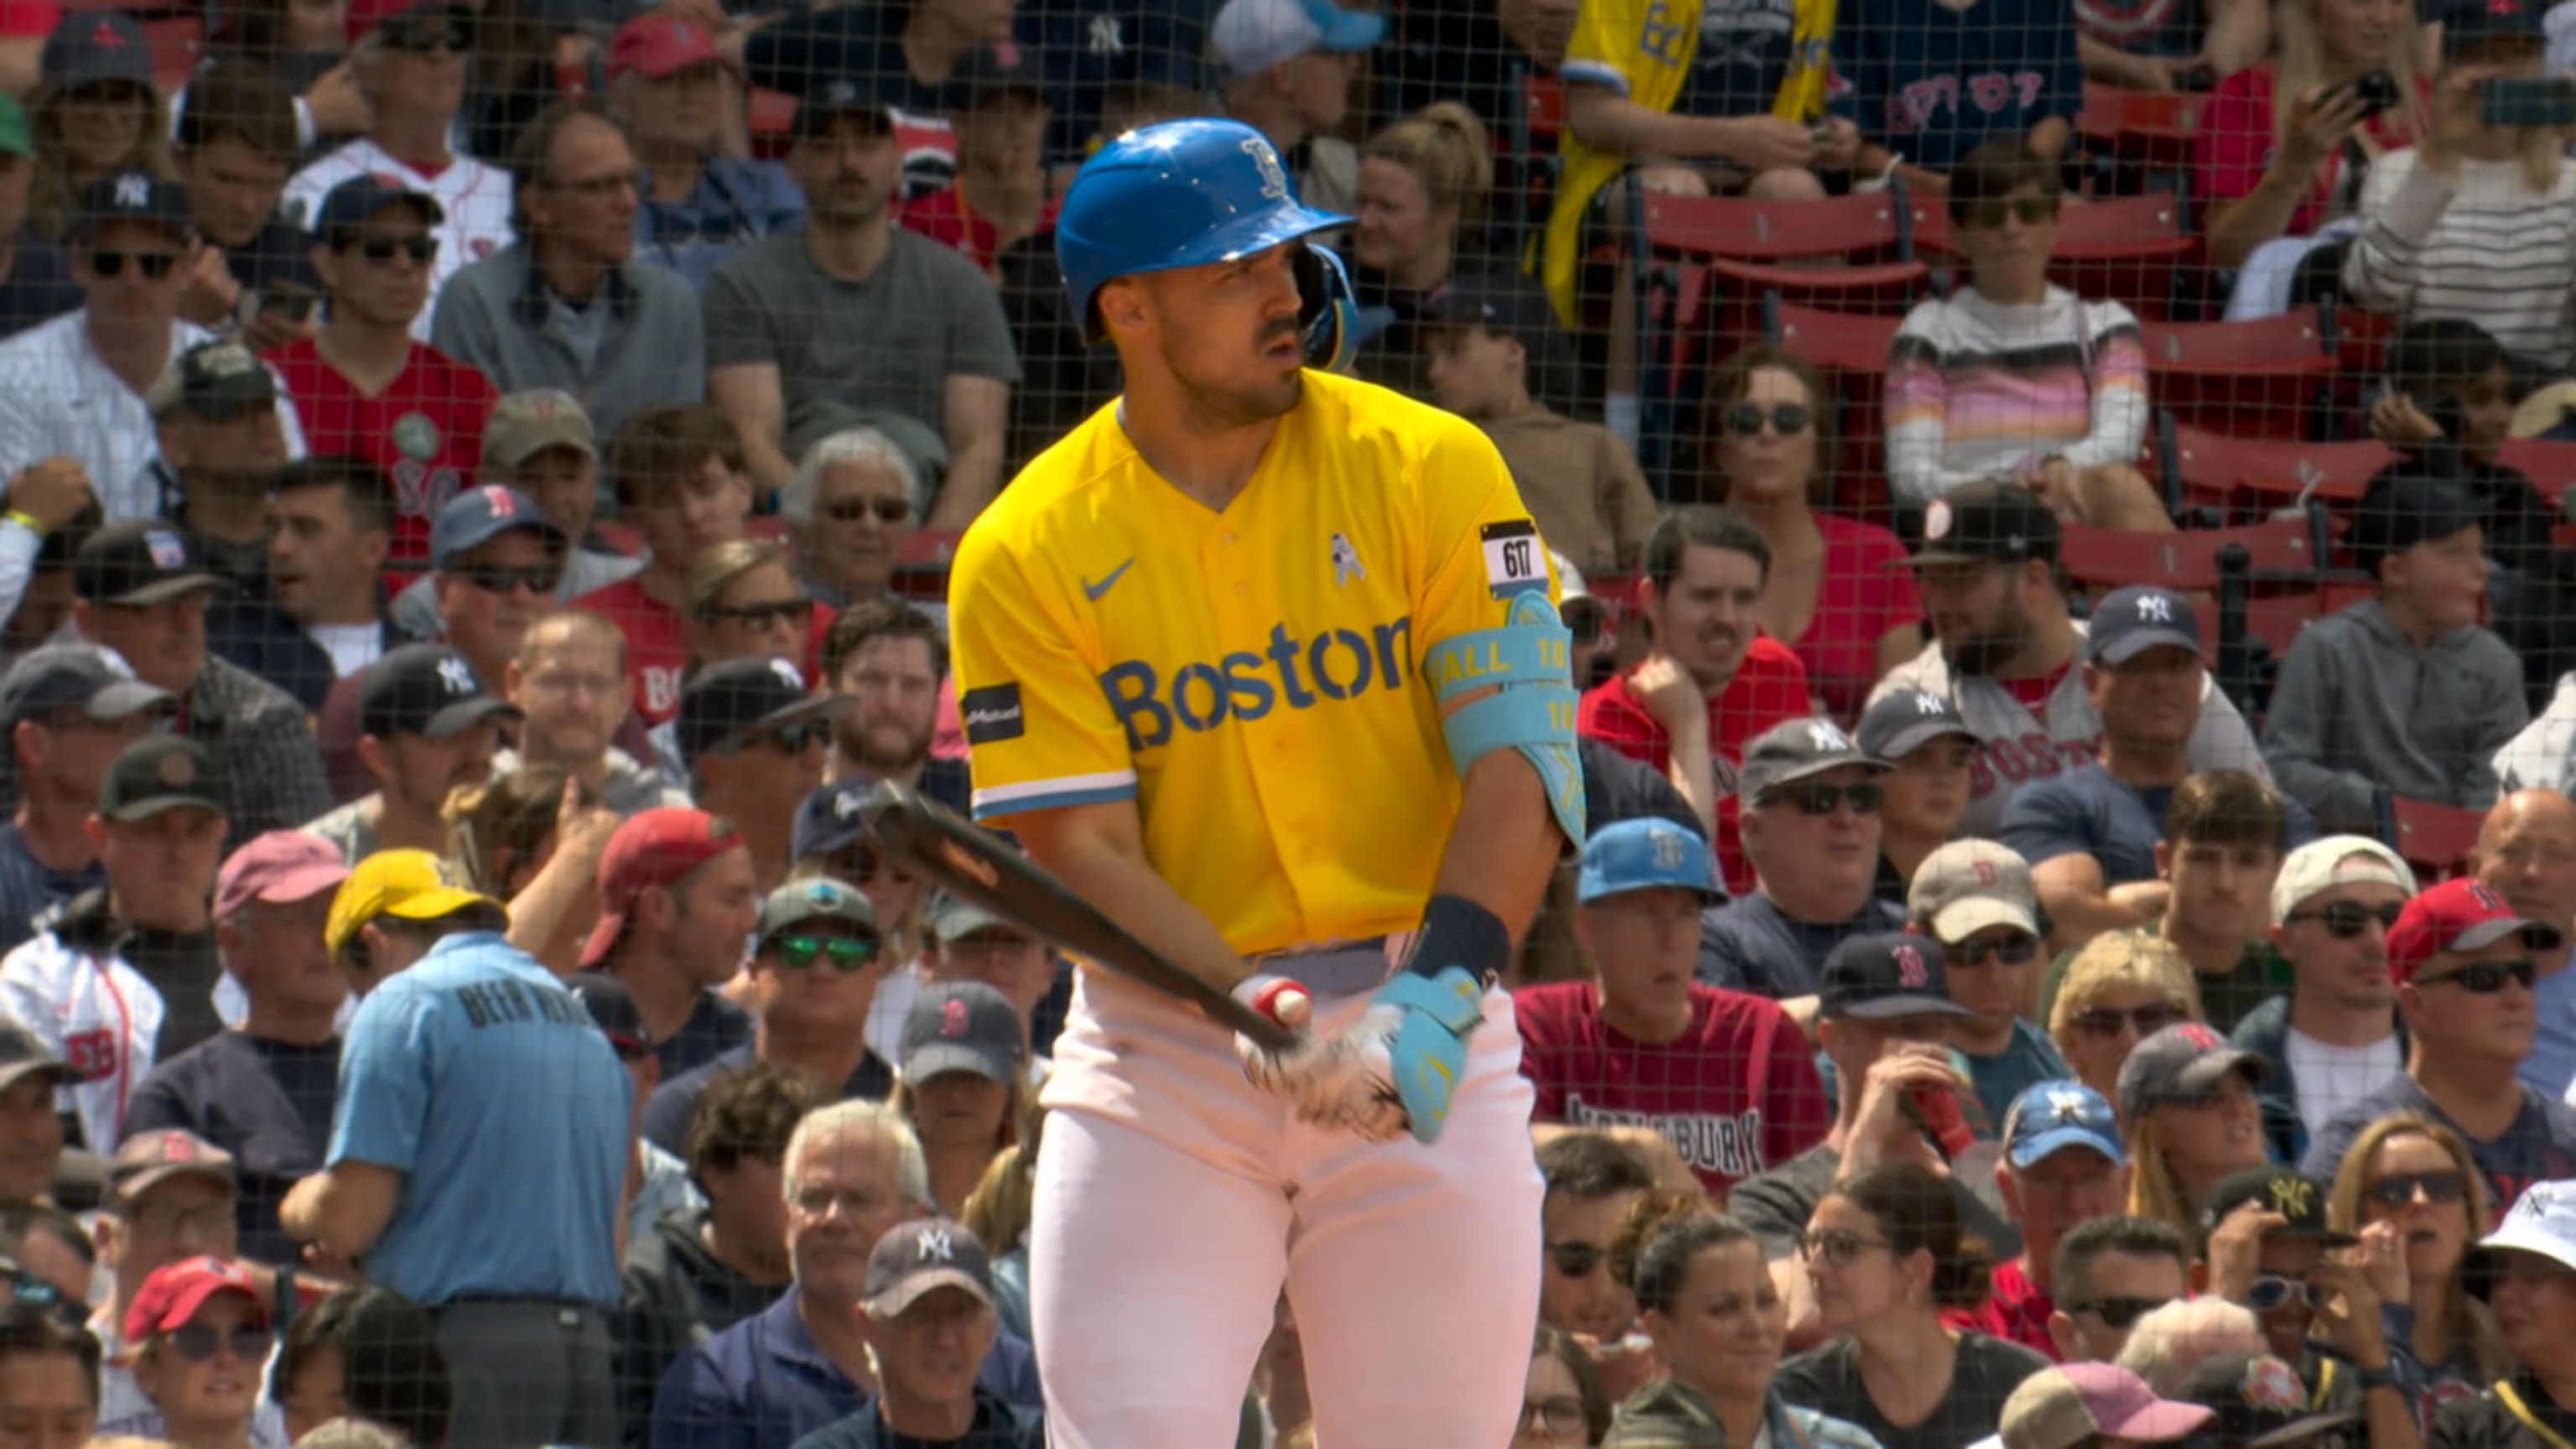 boston red sox uniforms today game